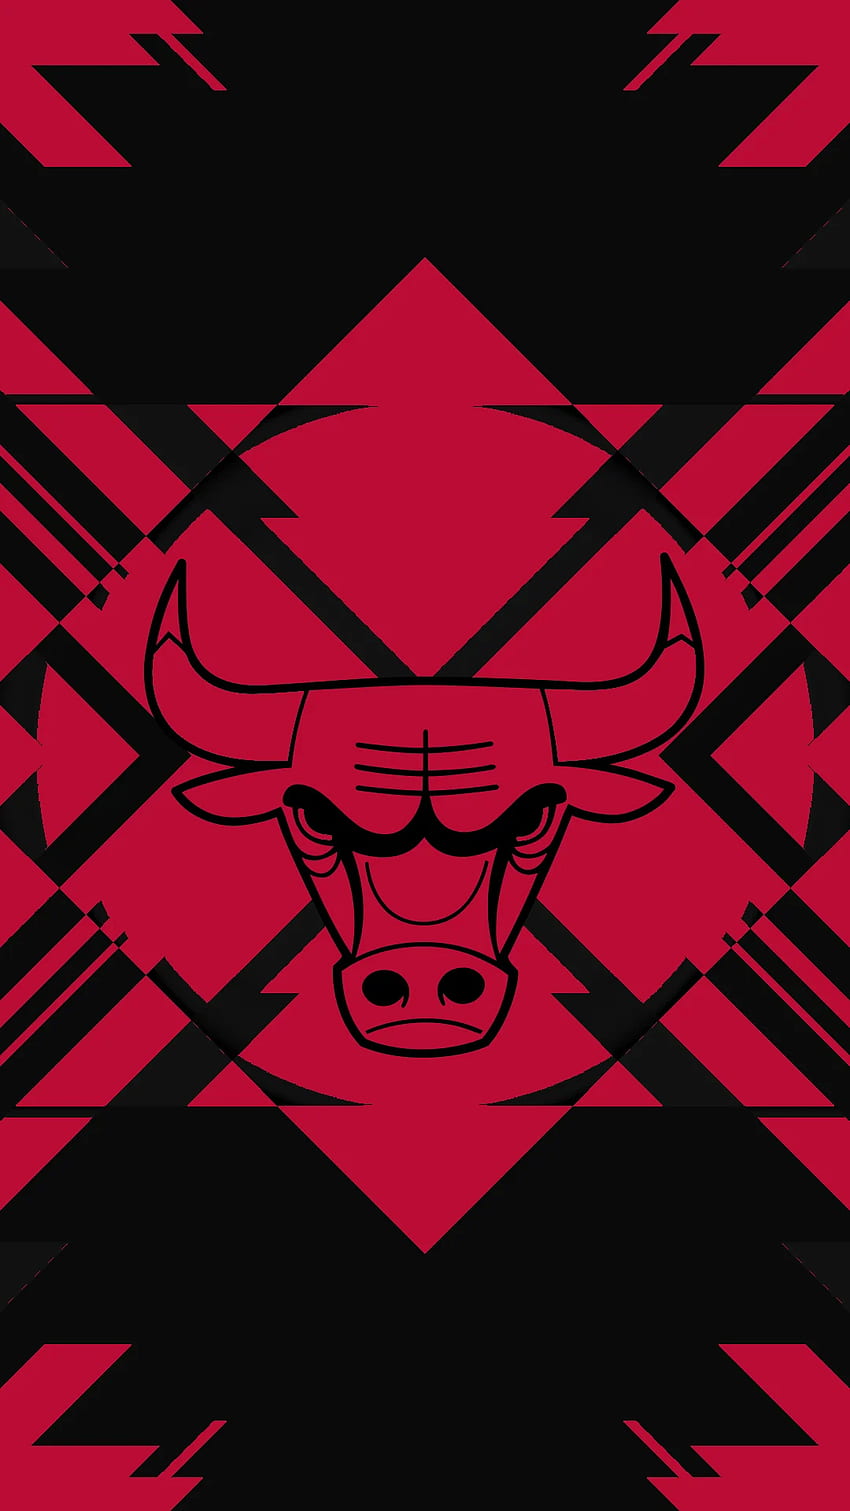 Chicago Bulls - Need a new phone background? We've got you HD phone wallpaper